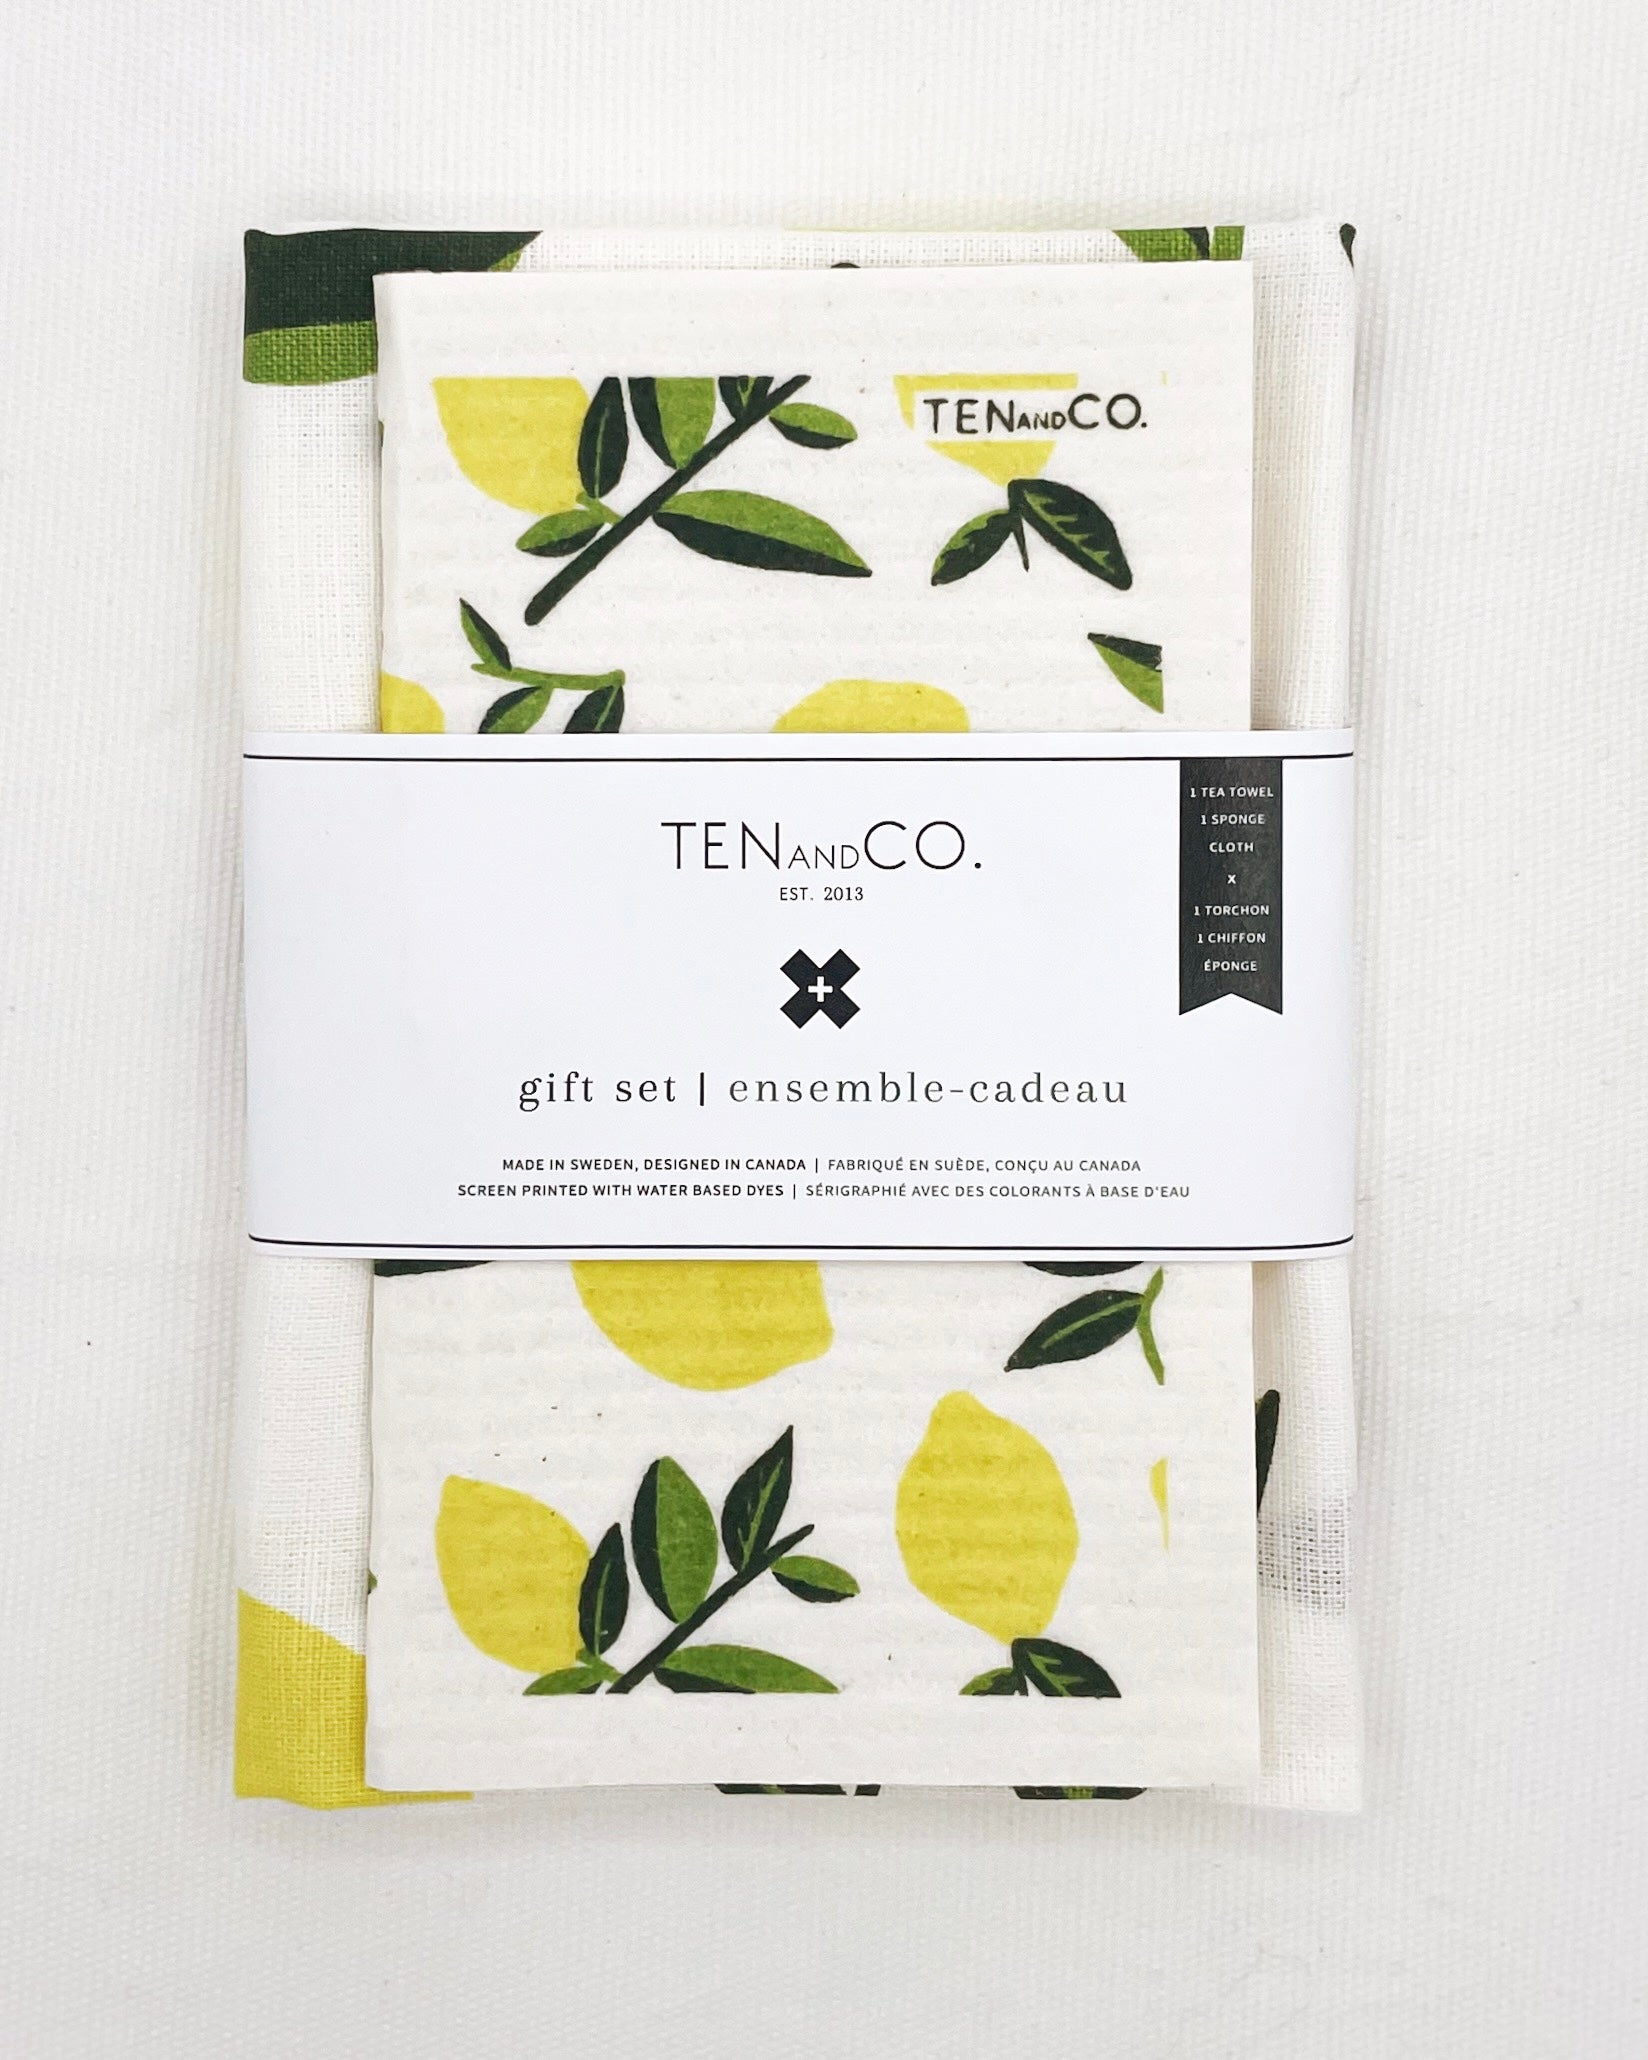 Flat lay image of Citrus Lemon Gift Set on white background. There is a Citrus Lemon sponge cloth folded with a Citrus Lemon tea towel folded behind it. They have a white belly band around them. The sponge cloth has yellow lemons with a green stem throughout. The belly band has the Ten and Co. Logo with descriptive text in black font.